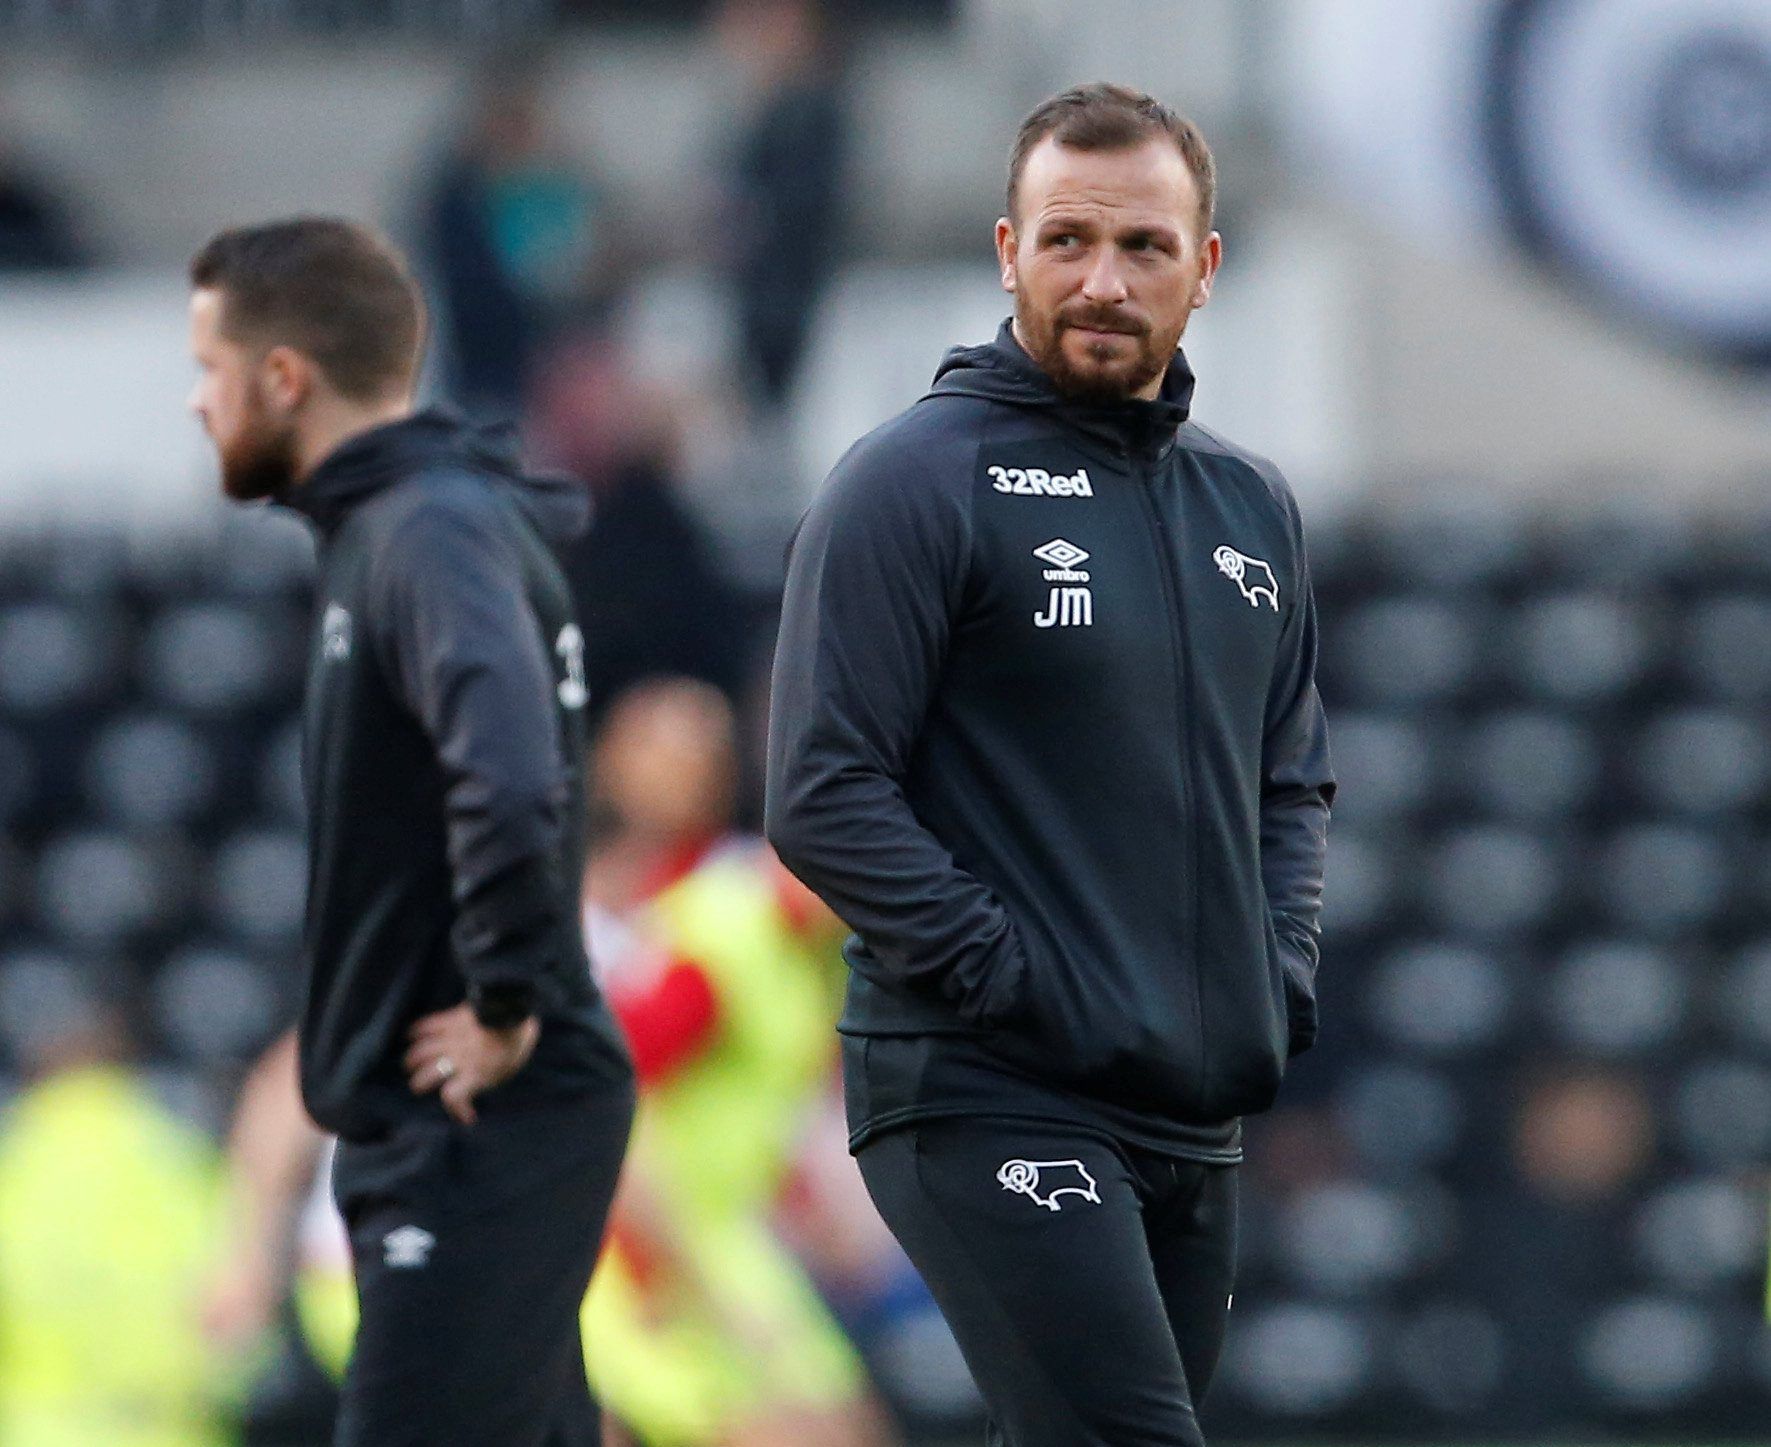 Soccer Football - Championship - Derby County v Sheffield United - Pride Park, Derby, Britain - October 20, 2018   Derby County assistant manager Jody Morris before the match    Action Images/Craig Brough    EDITORIAL USE ONLY. No use with unauthorized audio, video, data, fixture lists, club/league logos or 